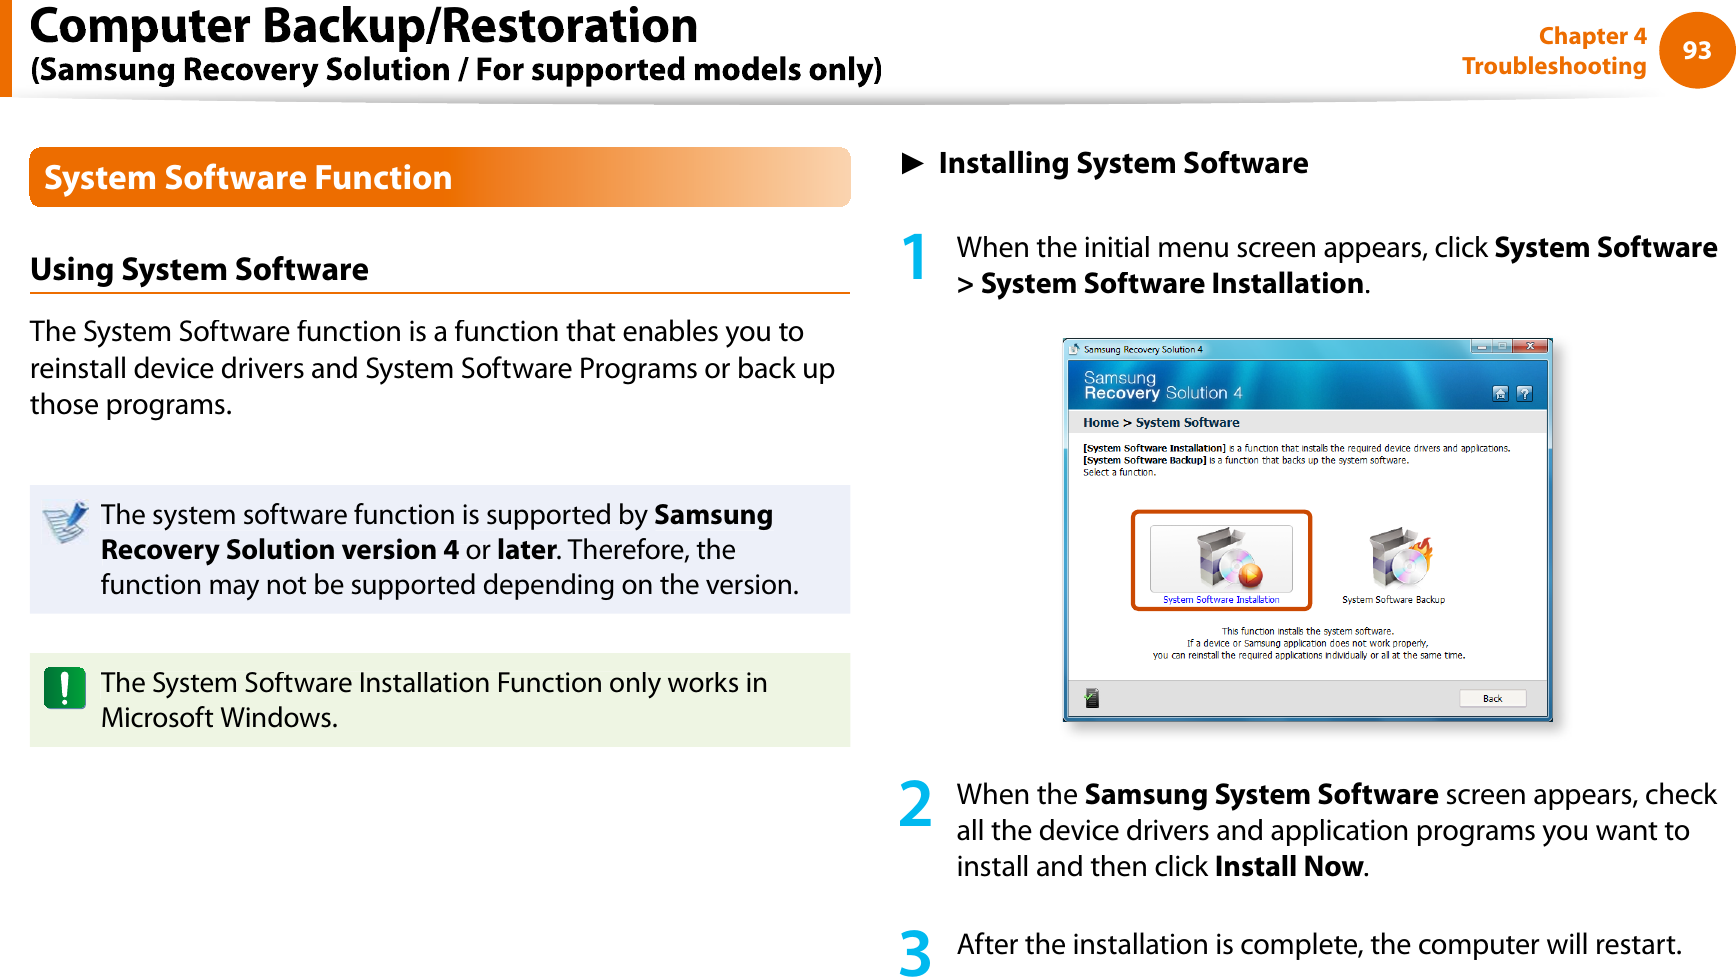 93Chapter 4TroubleshootingSystem Software FunctionUsing System SoftwareThe System Software function is a function that enables you toreinstall device drivers and System Software Programs or back upthose programs.The system software function is supported bySamsungRecovery Solution version 4 orlater. Therefore, thefunction may not be supported depending on the version.The System Software Installation Function only works inMicrosoft Windows.ŹInstalling System Software1When the initial menu screen appears, click System Software&gt; System Software Installation.2When theSamsung System Software screen appears, check all the device drivers and application programs you want toinstall and then click Install Now.3After the installation is complete, the computer will restart.Computer Backup/Restoration